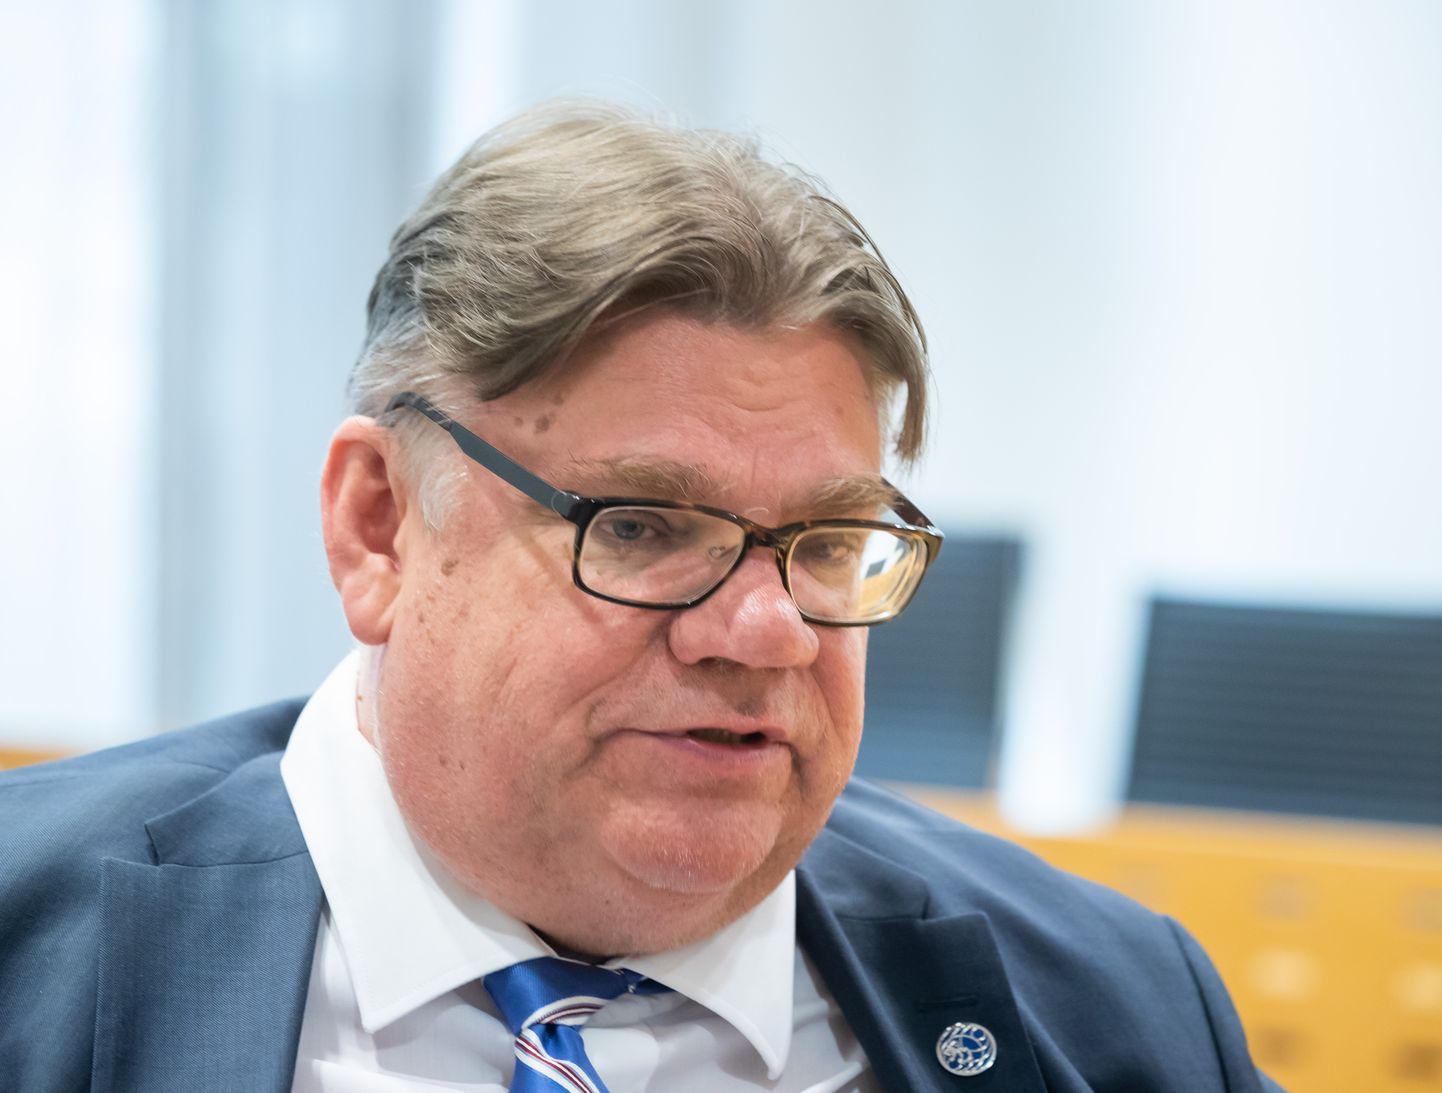 Soome välisminister Timo Soini Eestis visiidil.

The Foreign Minister of Finland Timo Soini to visit Estonia.
He is a Finnish politician who is the co-founder and former leader of the Finns Party. He served as Deputy Prime Minister of Finland from 2015 to 2017
FOTO: MIHKEL MARIPUU/EESTI MEEDIA